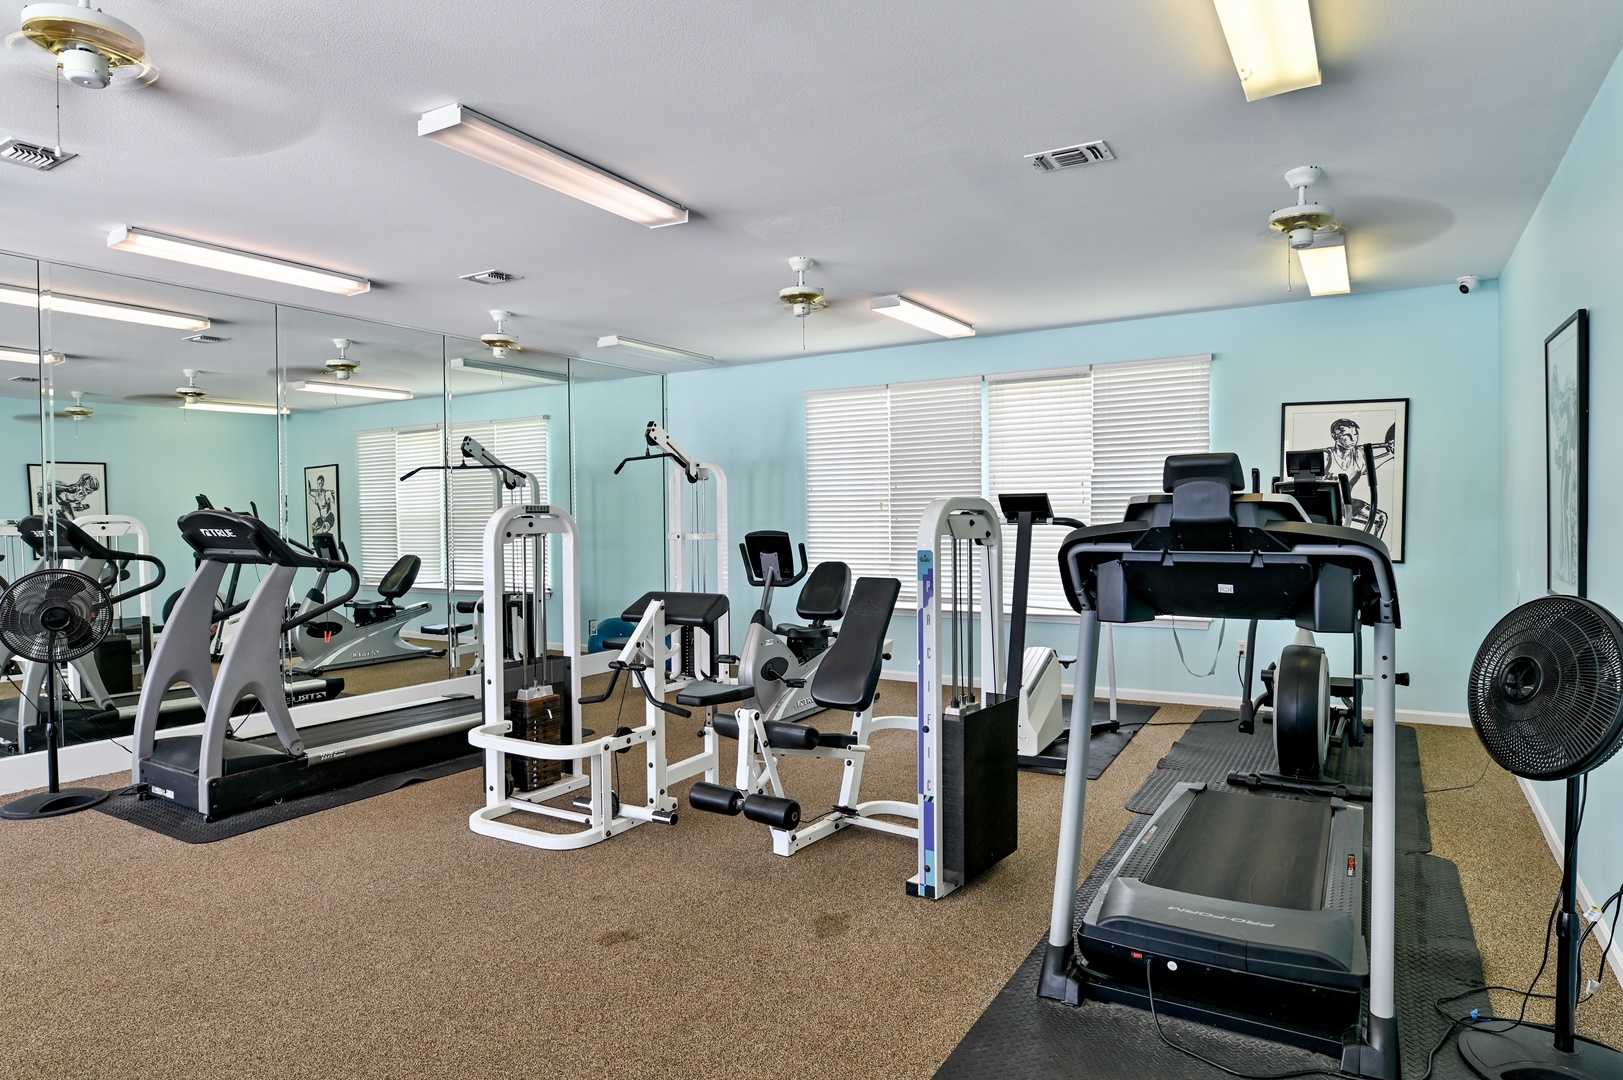 Stay fit with this fully equipped gym